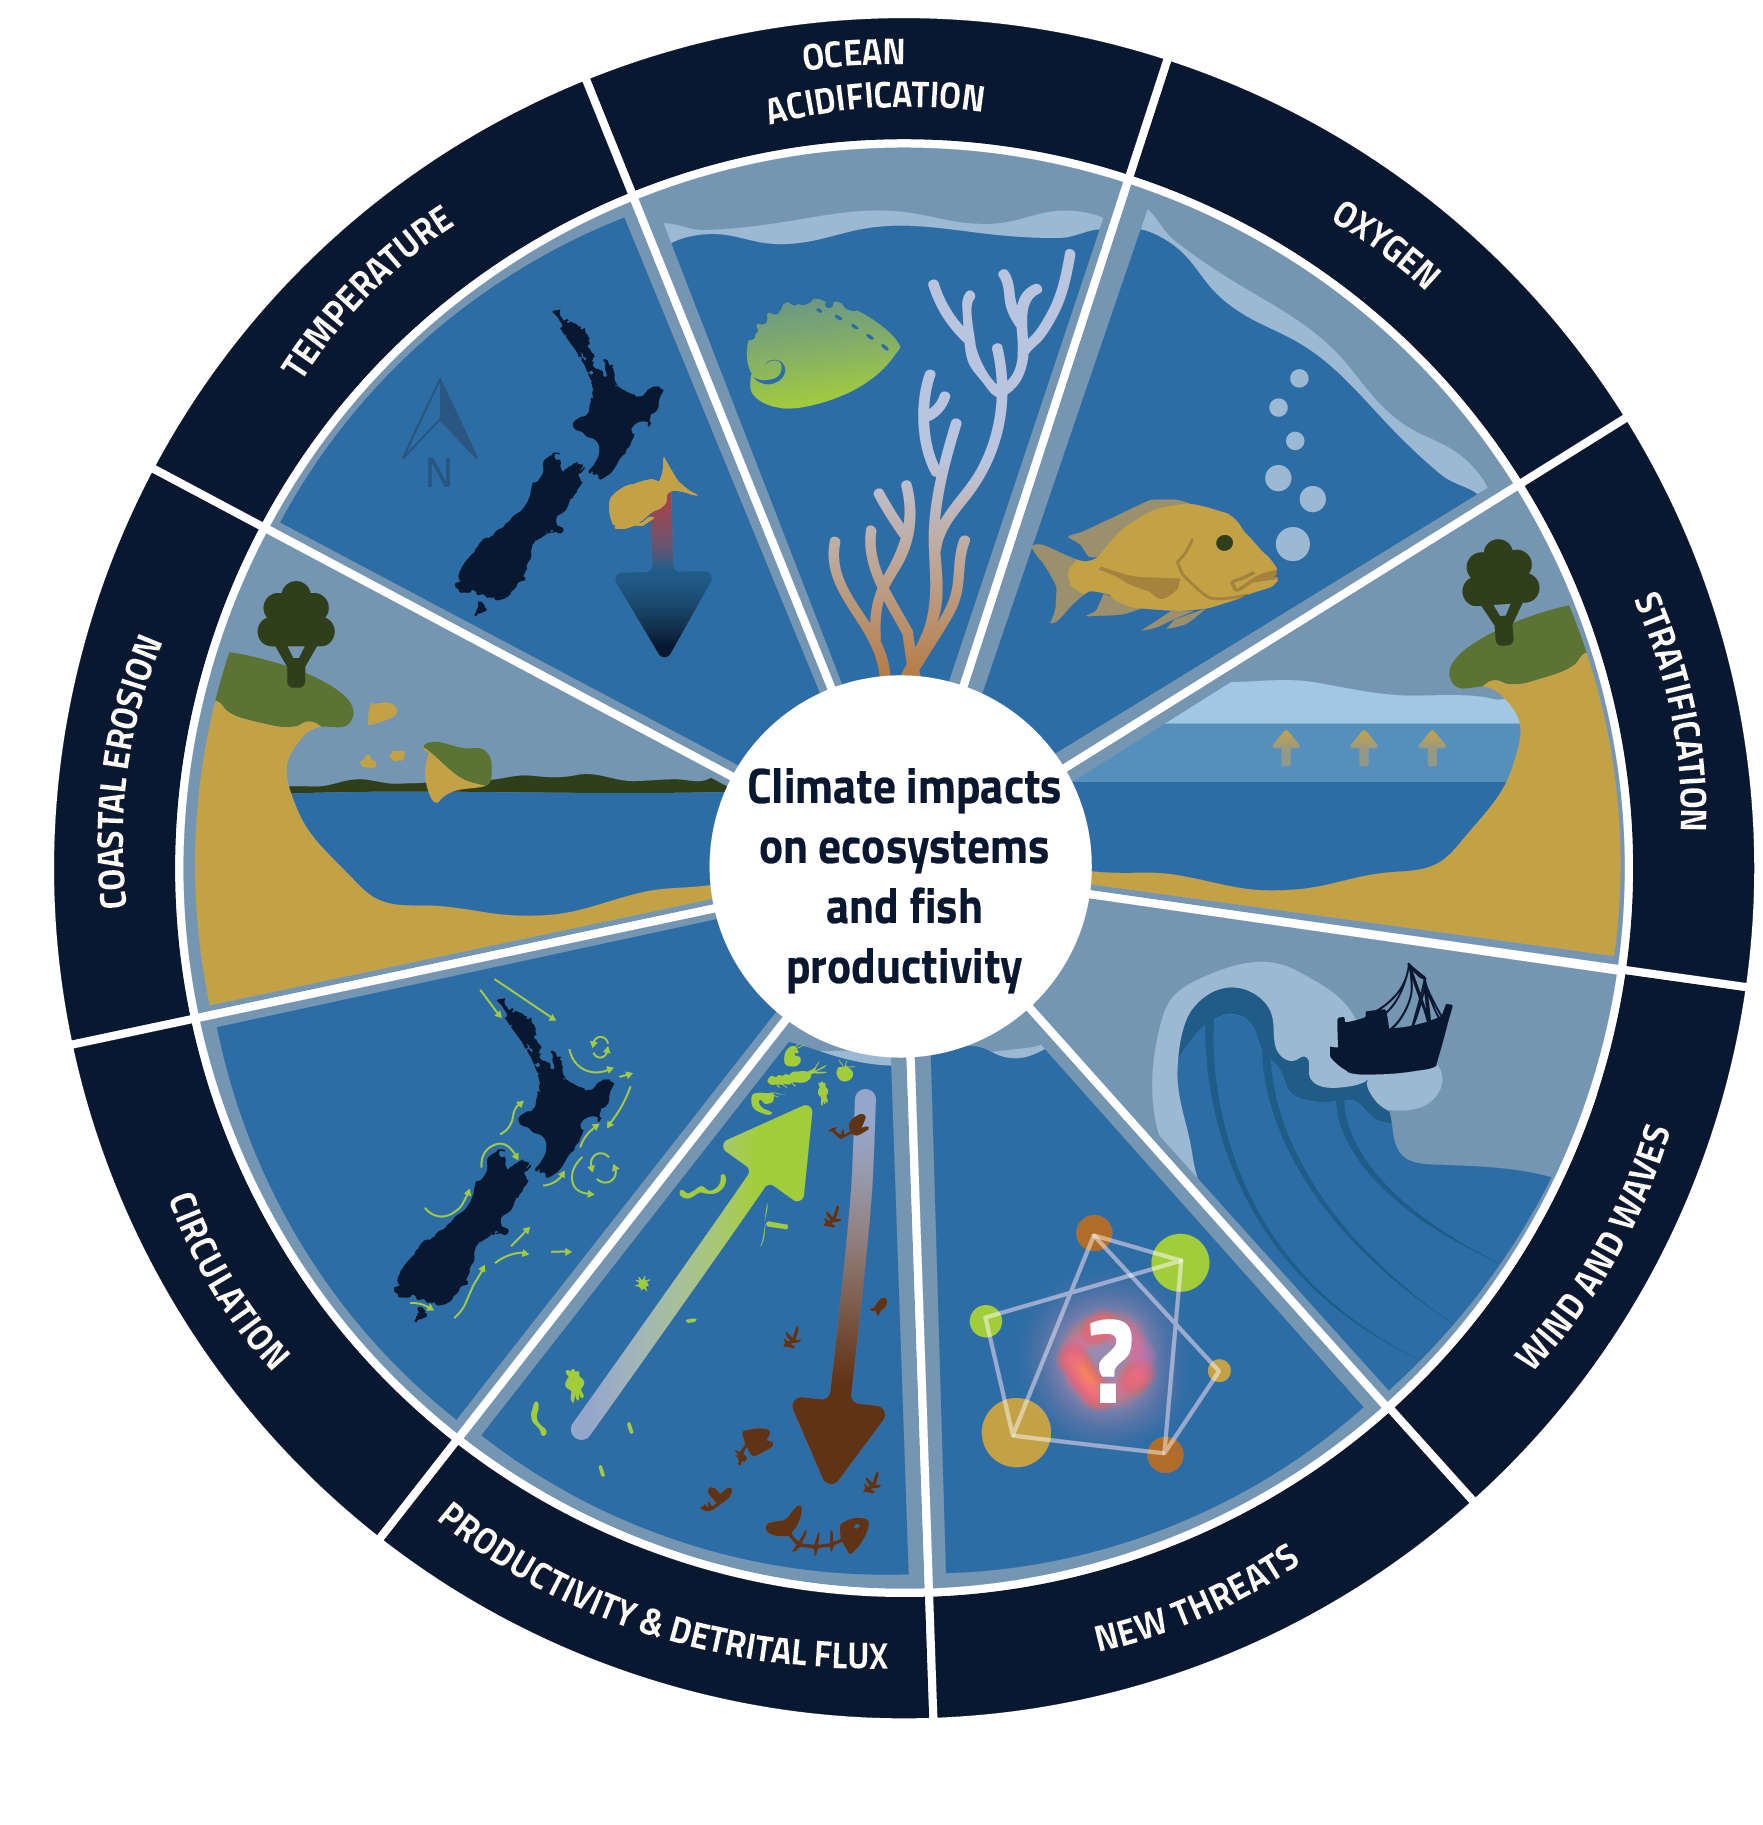 This pictorial wheel is a graphic divided into 9 sections: ocean acidification, oxygen, stratification, wind and waves, new threats, productivity and detrital flux, circulation, coast erosion, and temperature.